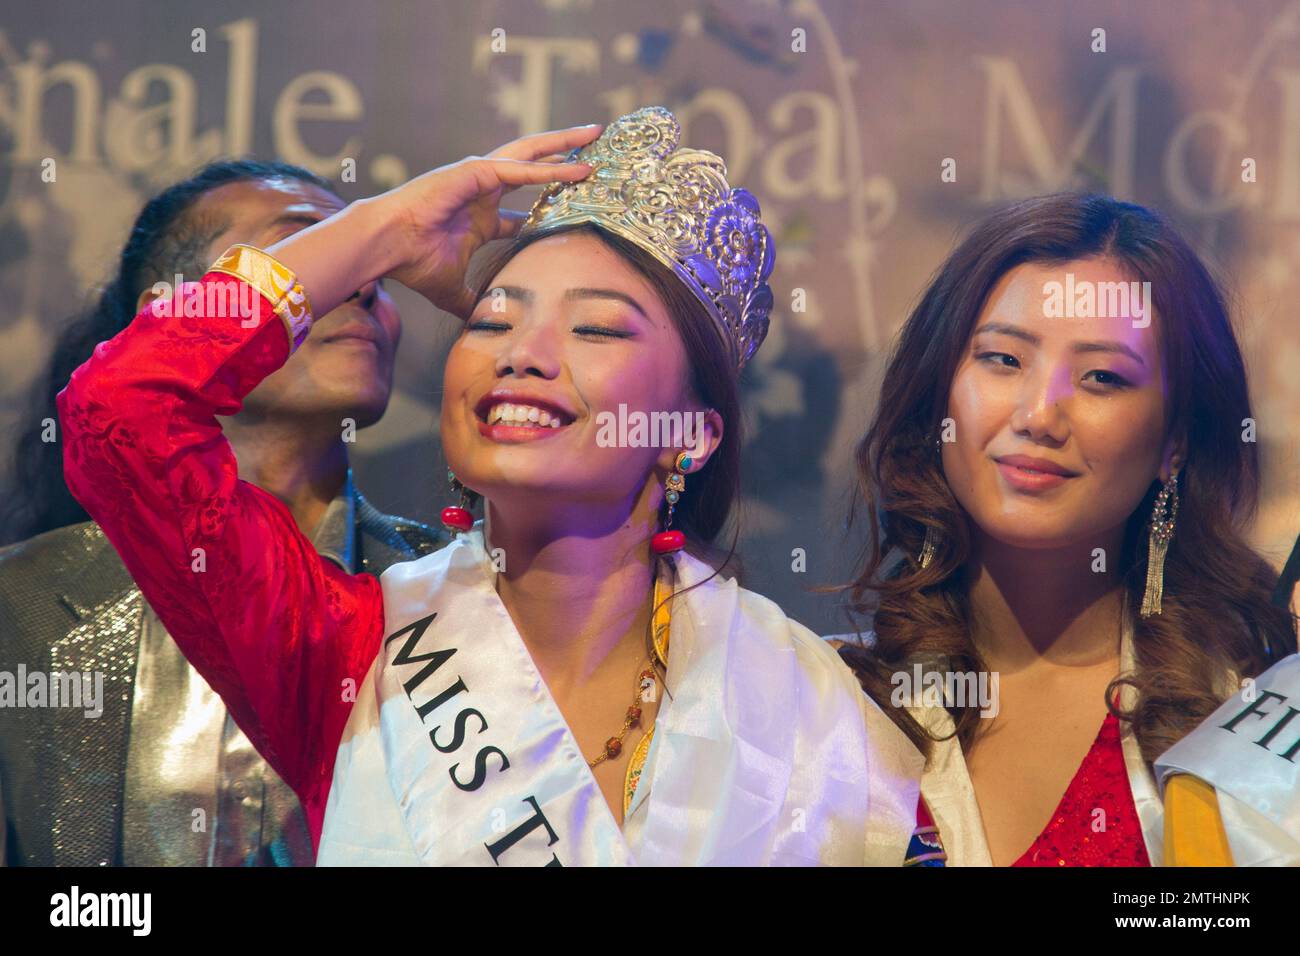 Tenzin Paldon, 21, reacts after winning the 2017 Miss Tibet beauty pageant at the Tibetan Institute of Performing Arts in Dharmsala, India, Sunday, June 4, 2017. Paldon, who lives in the Indian state of Karnataka, was declared winner among nine contestants. (AP Photo/Ashwini Bhatia) Stock Photo